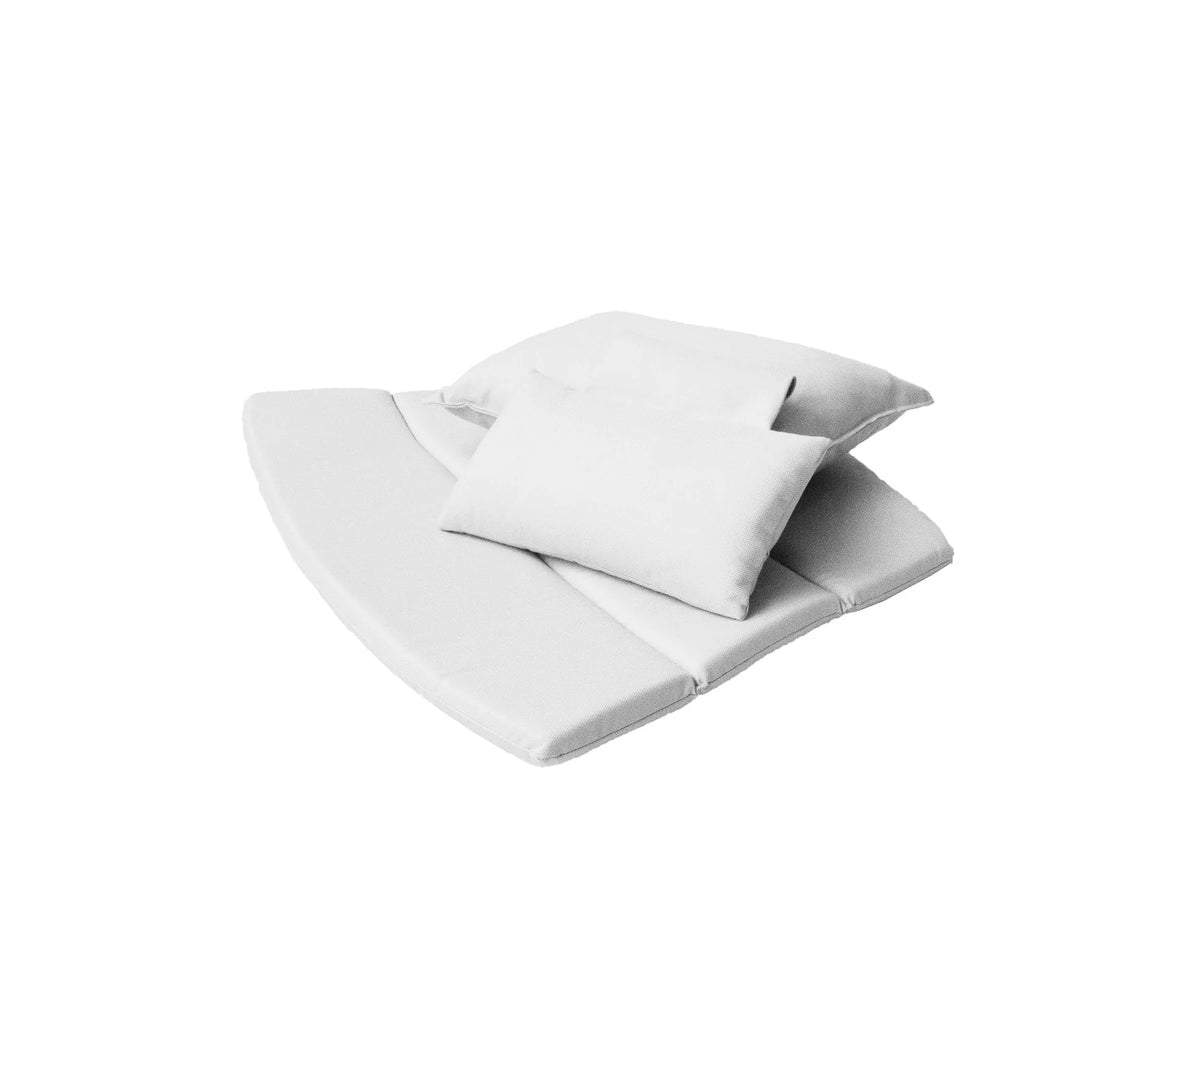 Breeze Highback Chair Replacement Cushions